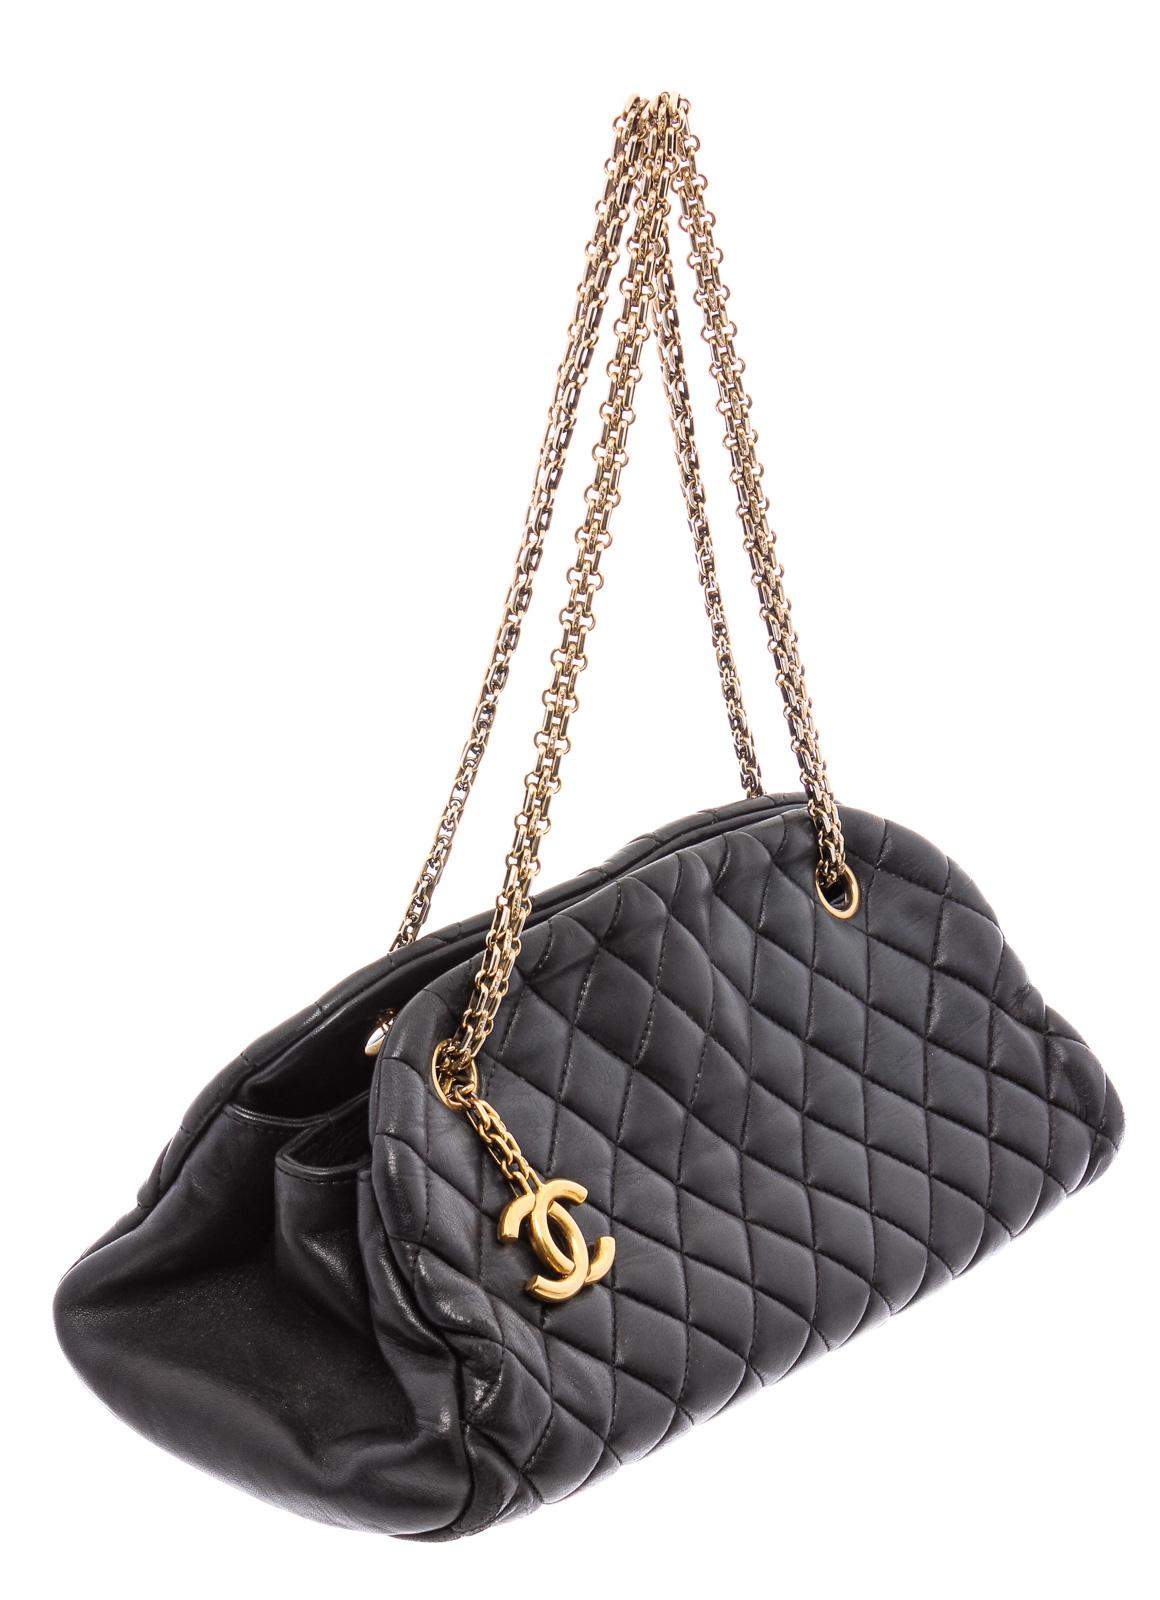 Black quilted leather Chanel Small Just Mademoiselle Bowling bag with antiqued gold-tone hardware, dual chain-link shoulder straps featuring logo charm, burgundy canvas lining, three compartments, single zip pocket at interior wall and open